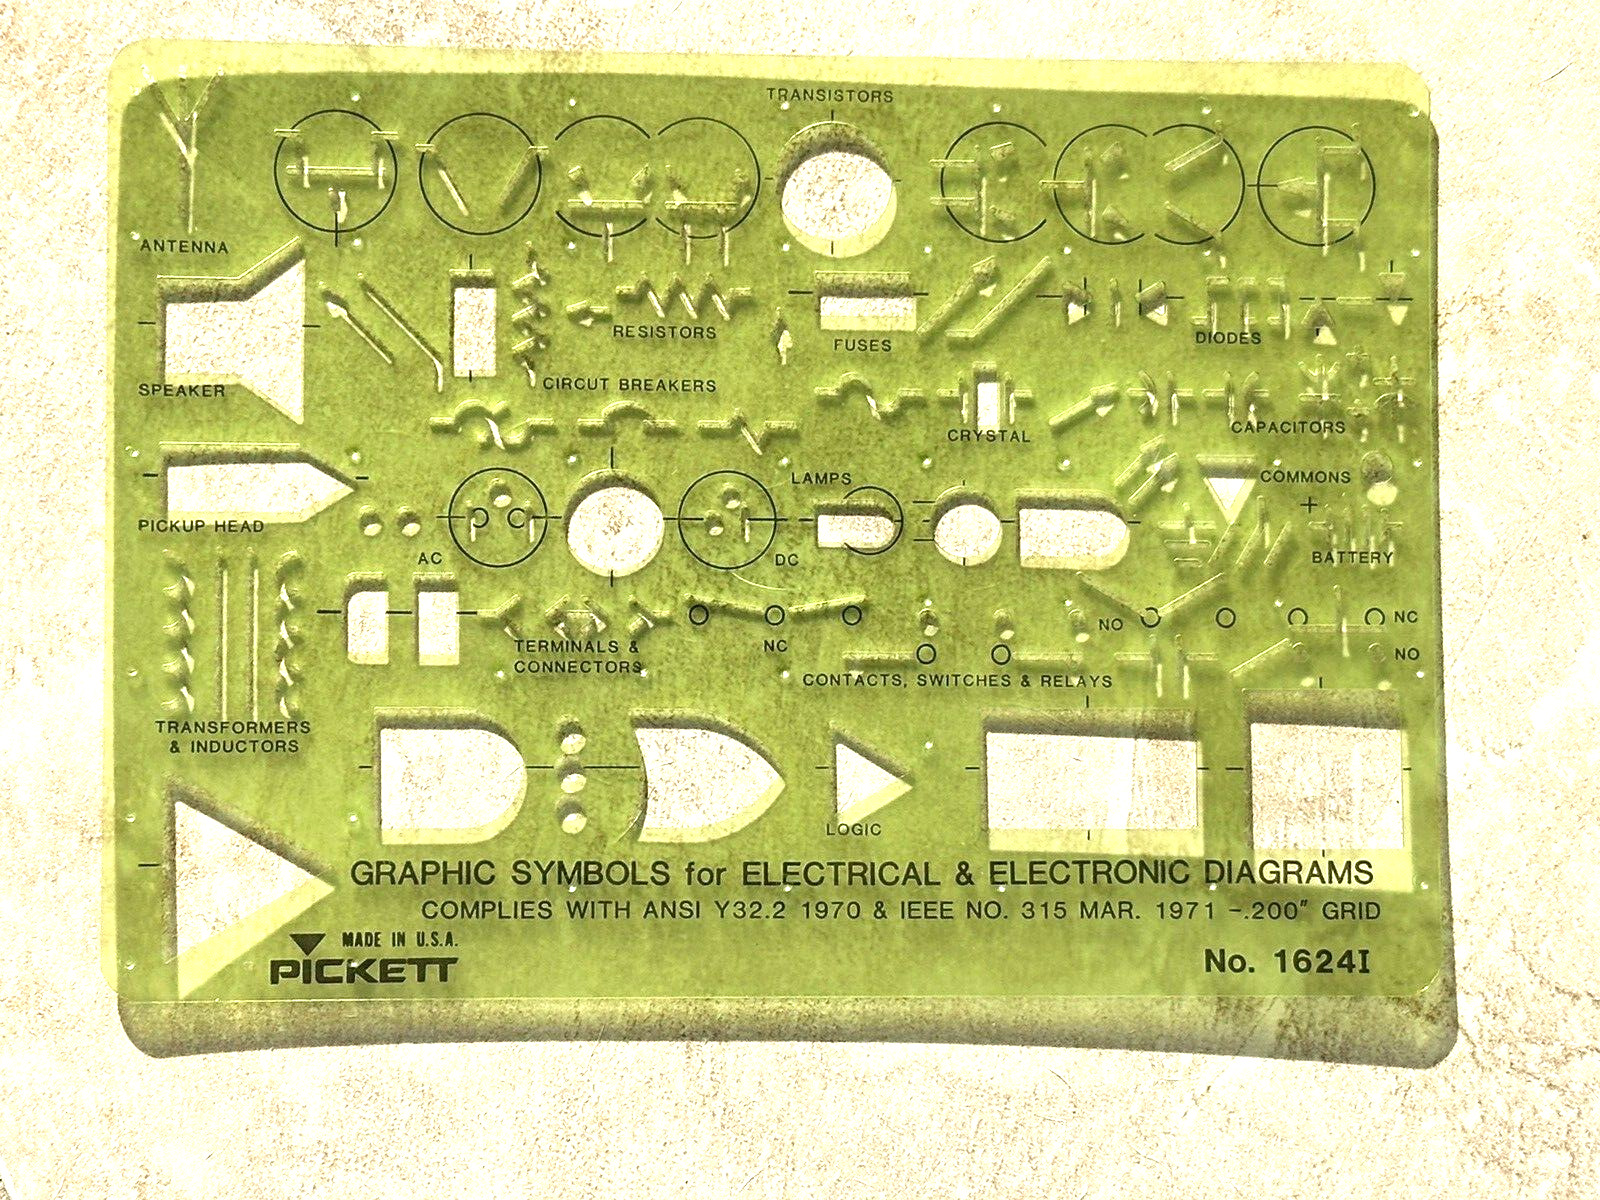 Vintage Pickett Template, No. 1624I, Electrical & Electronic Diagrams